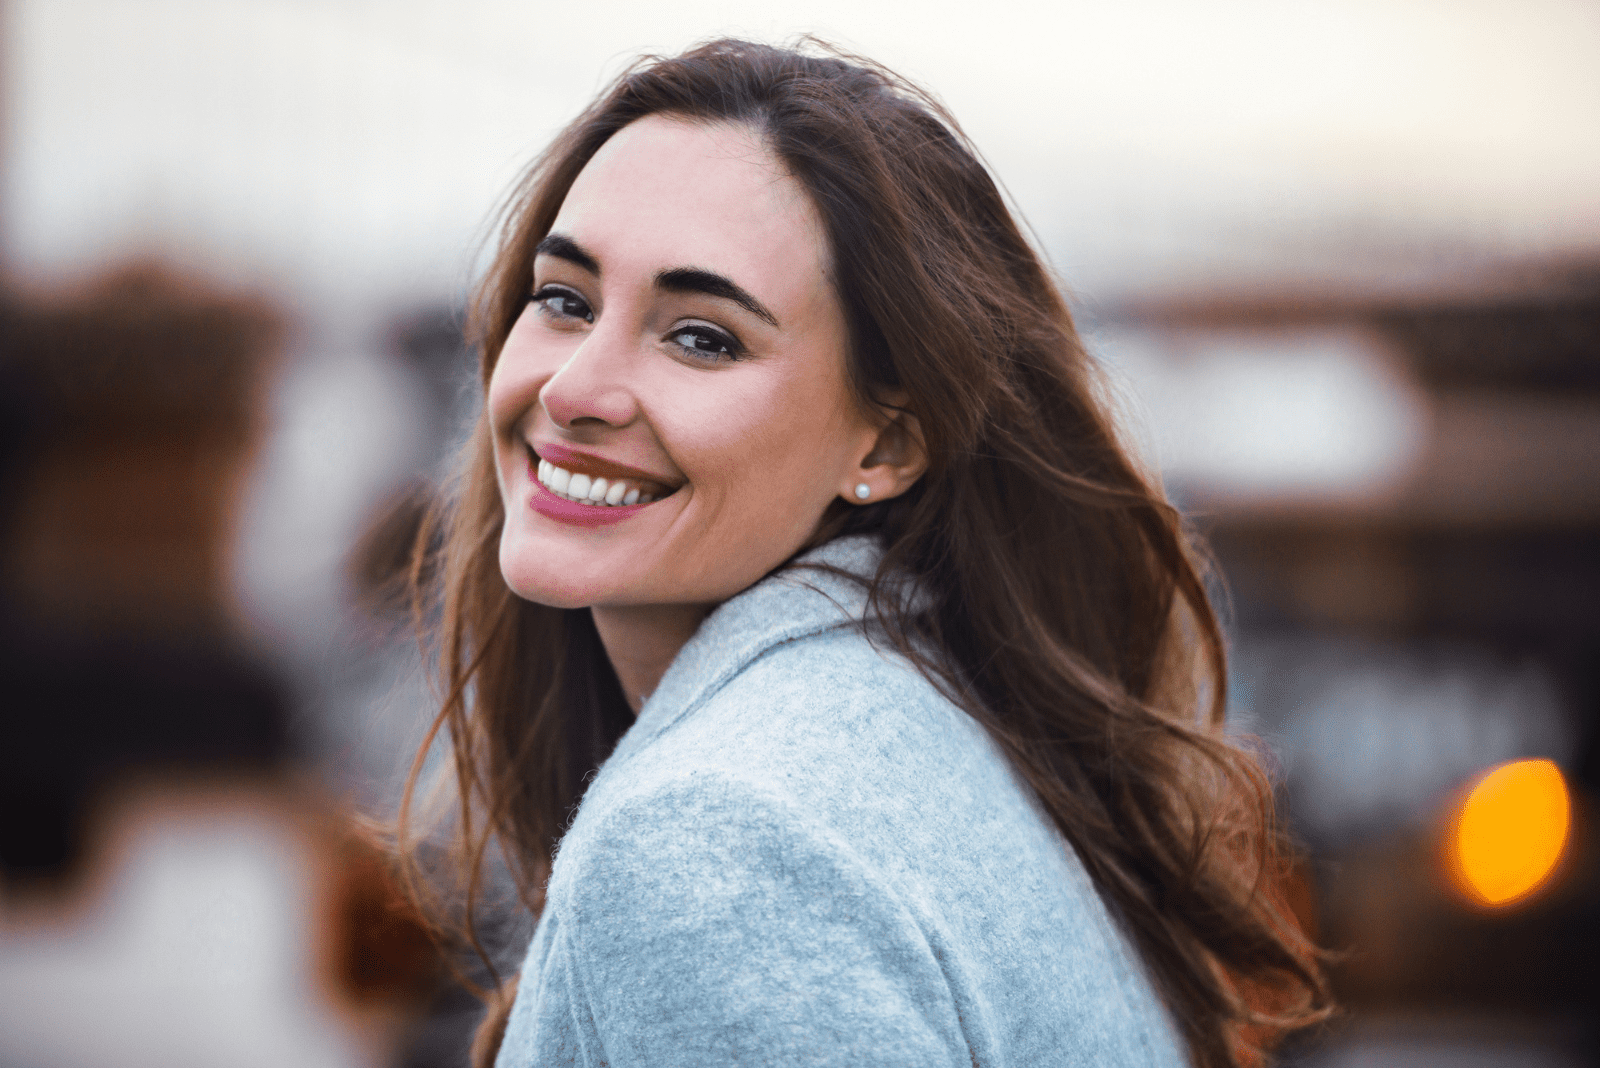 beautiful smiling woman with long brown hair